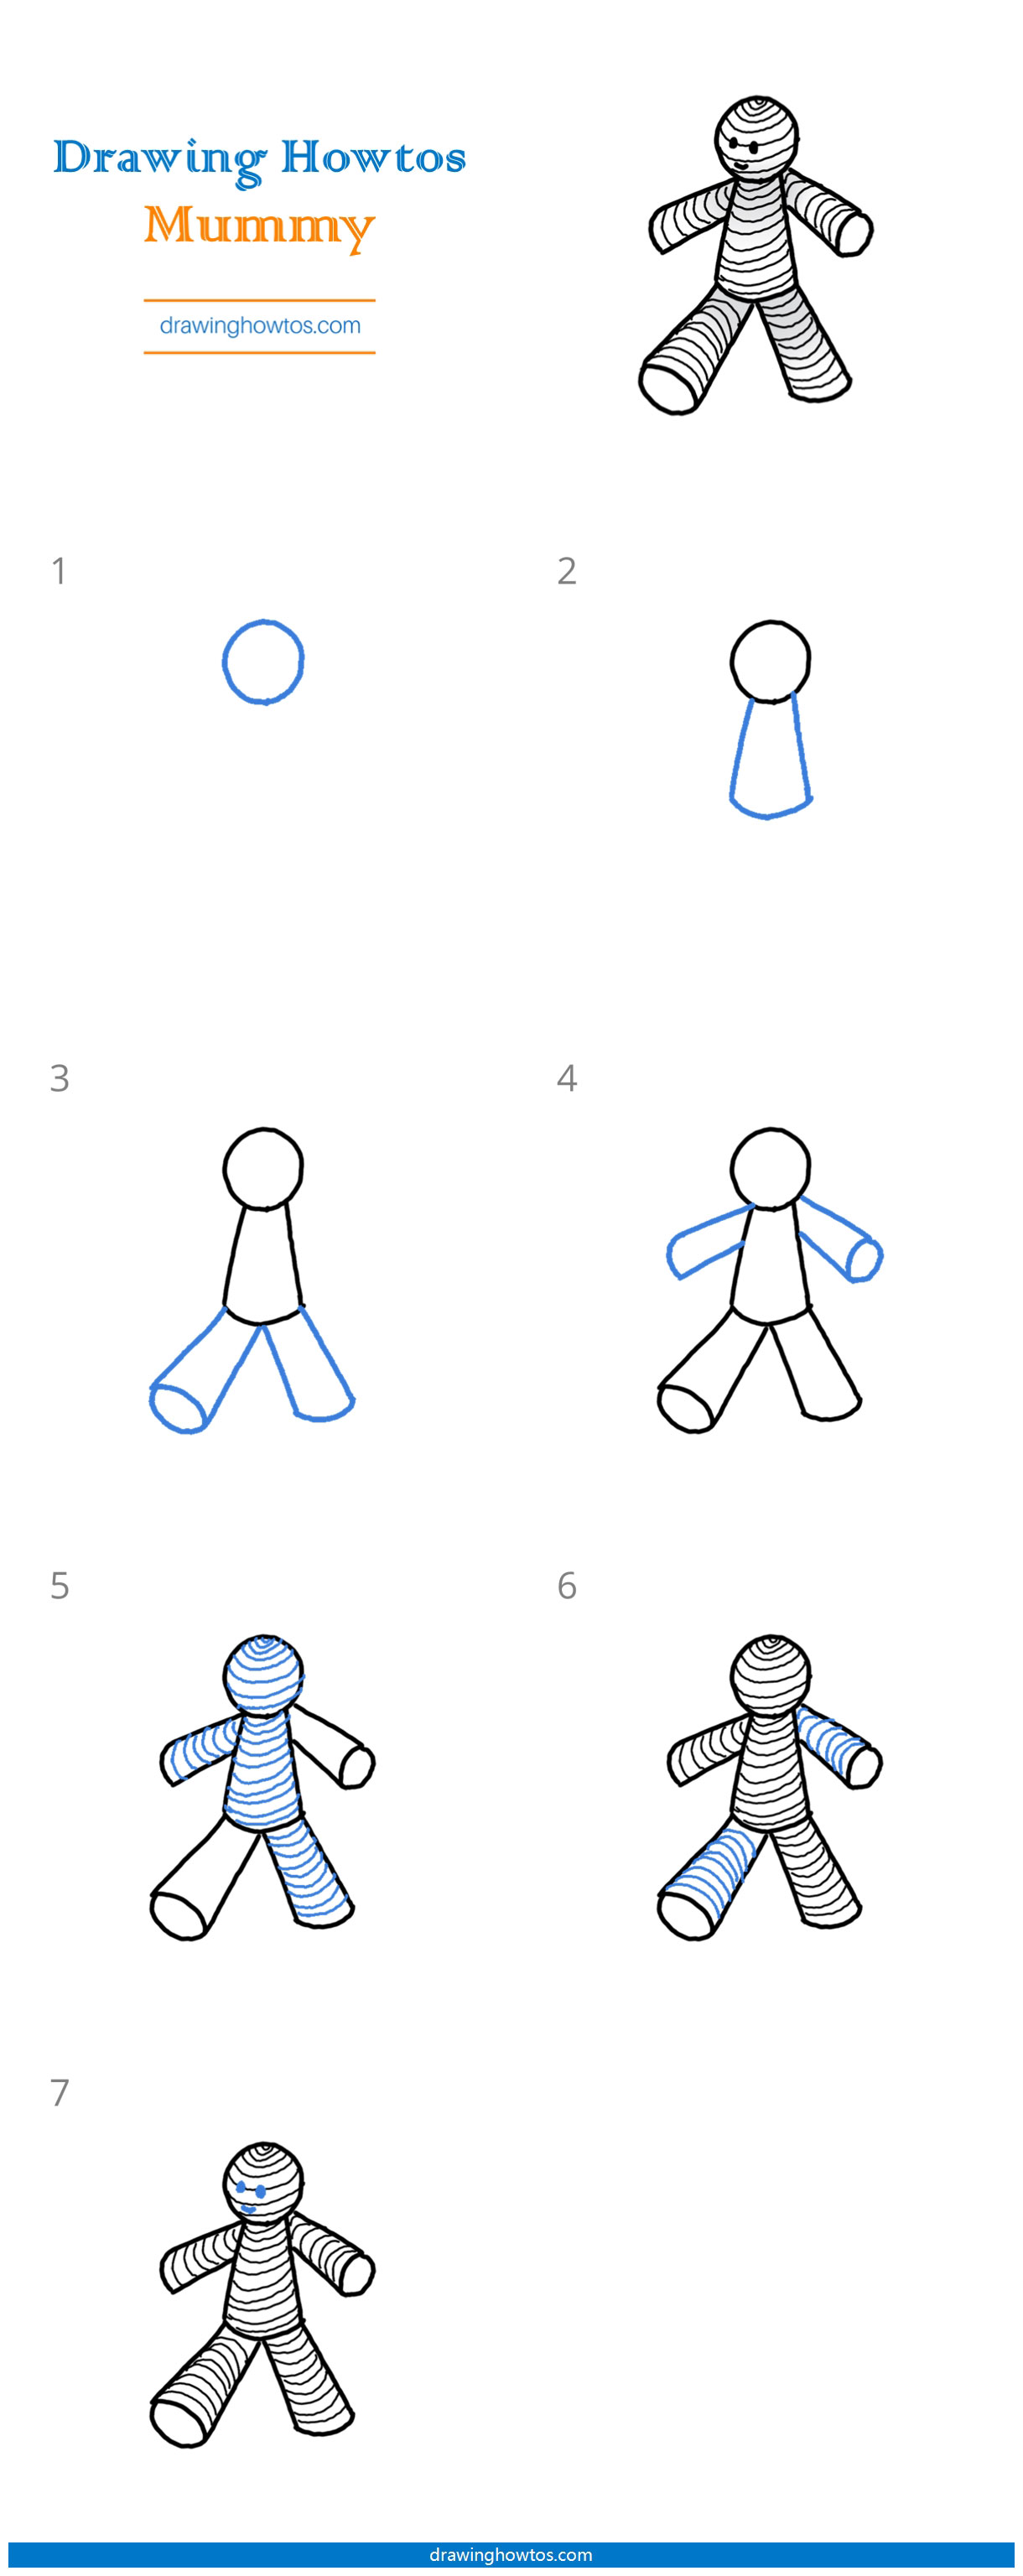 How to Draw a Walking Mummy Step by Step